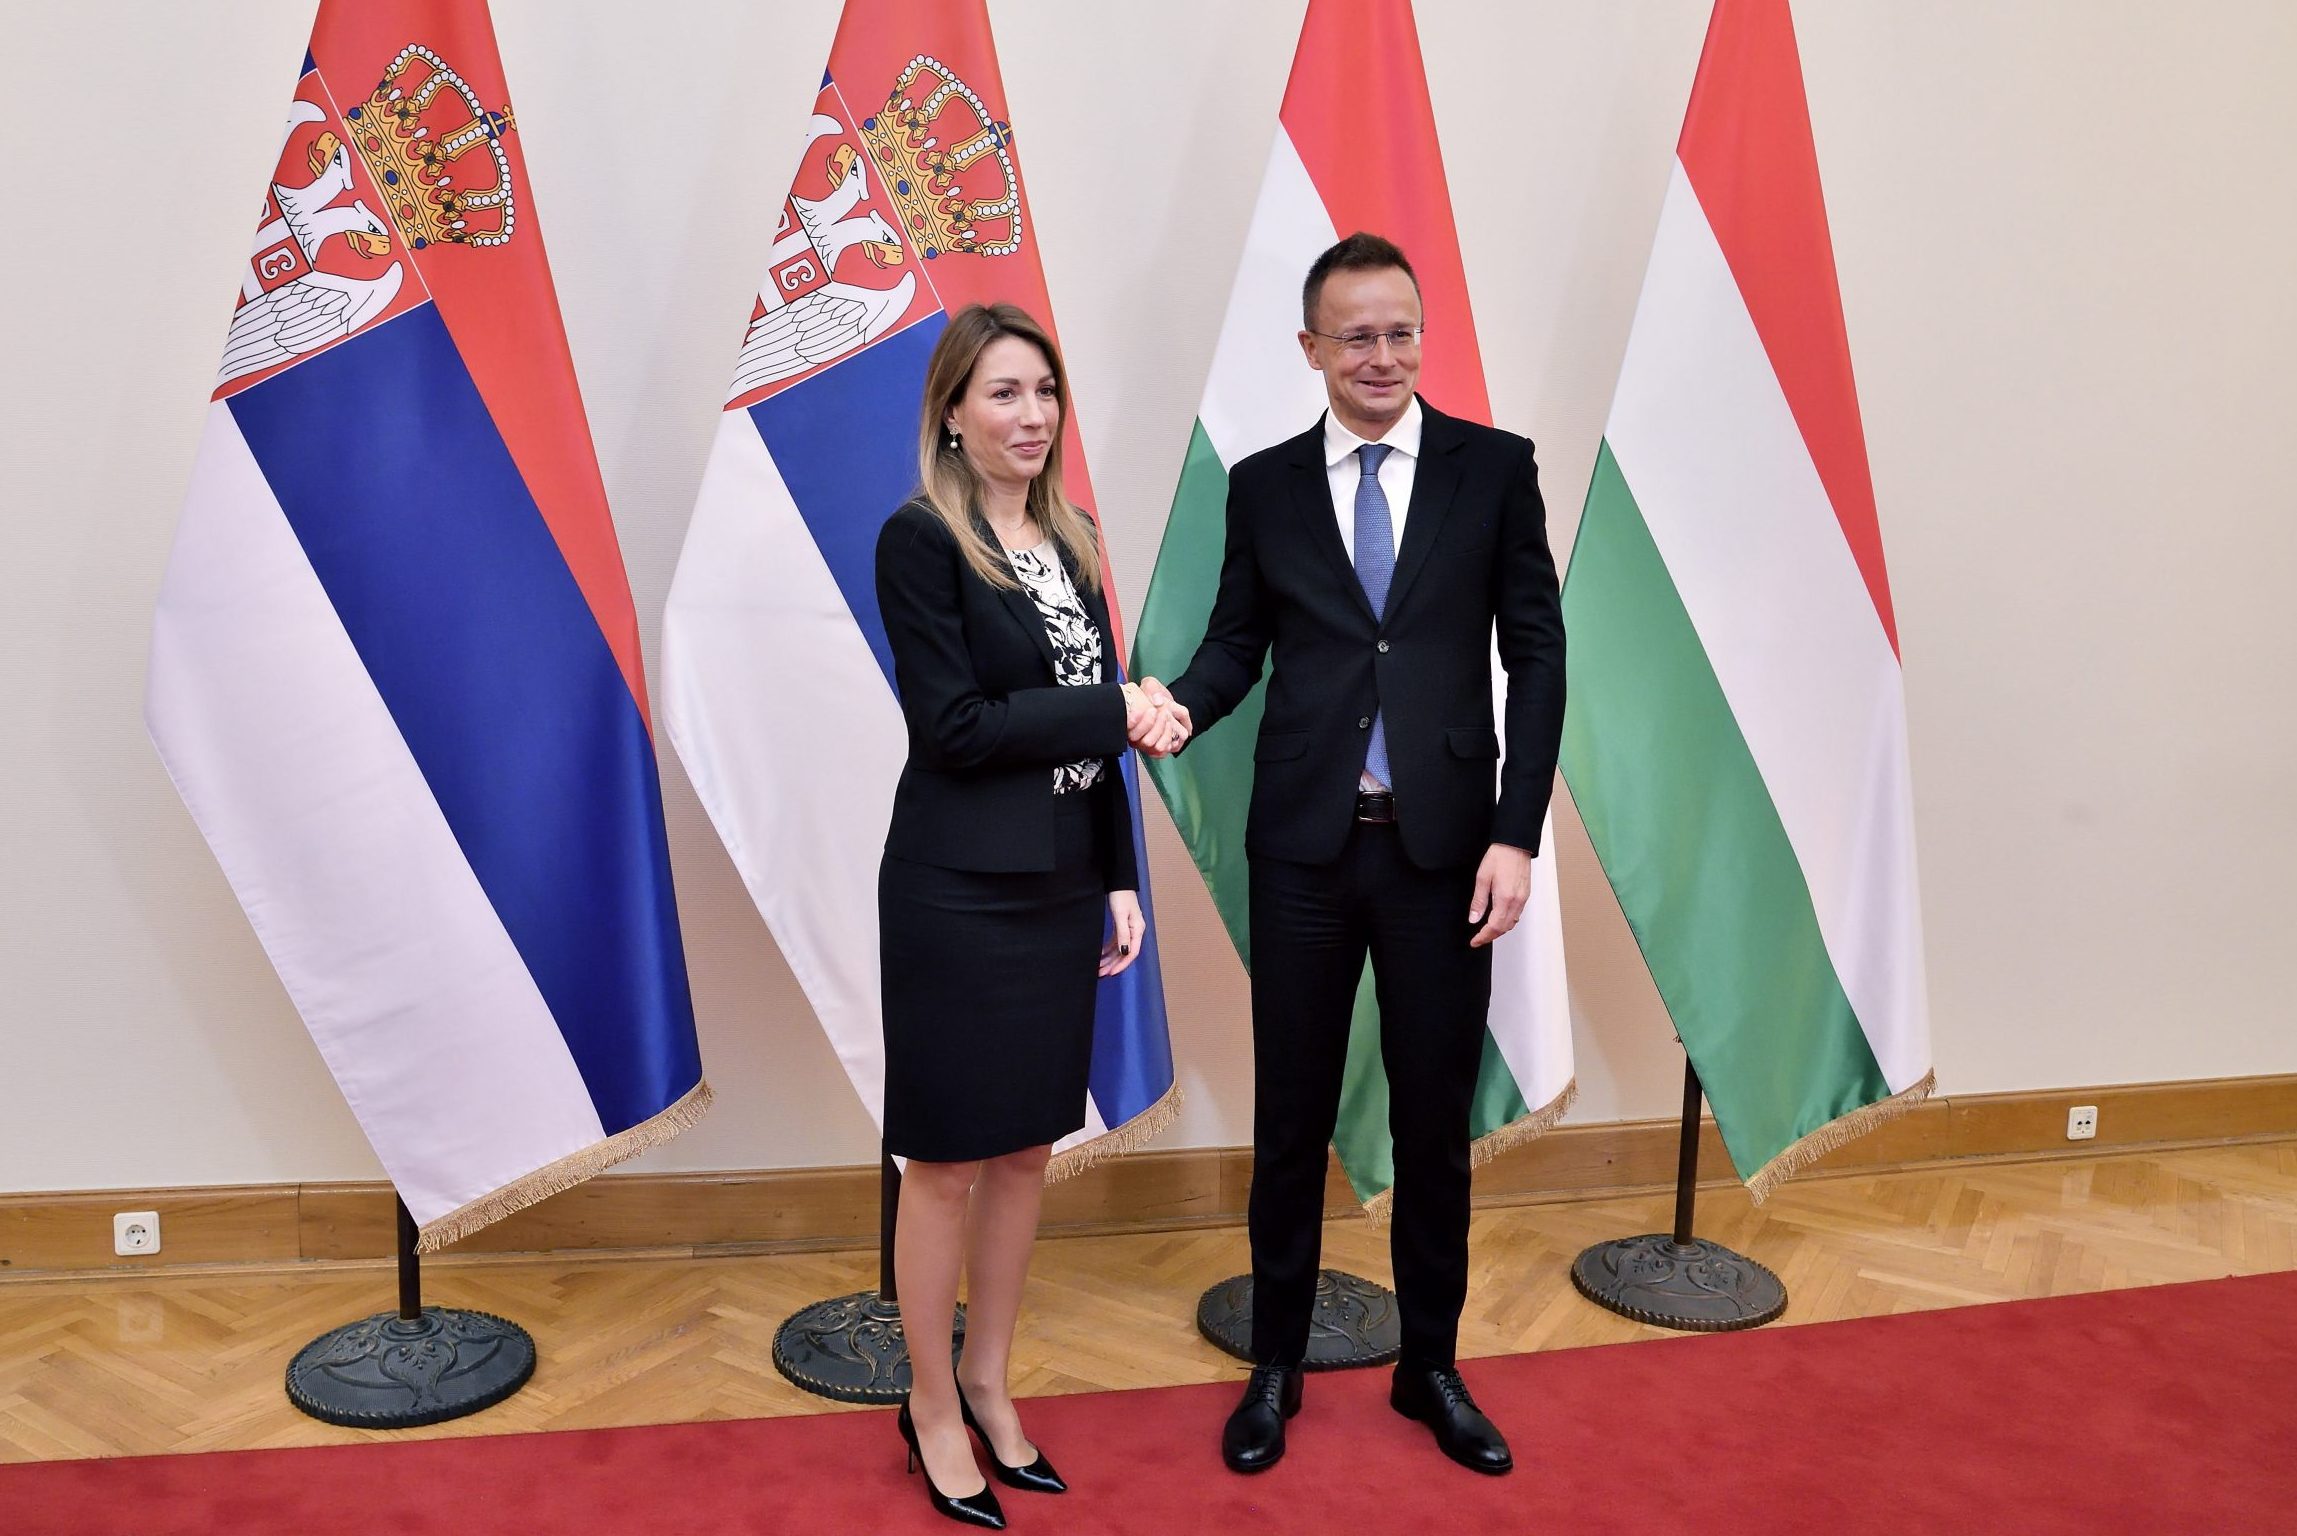 Hungary and Serbia to Build a New Oil Pipeline